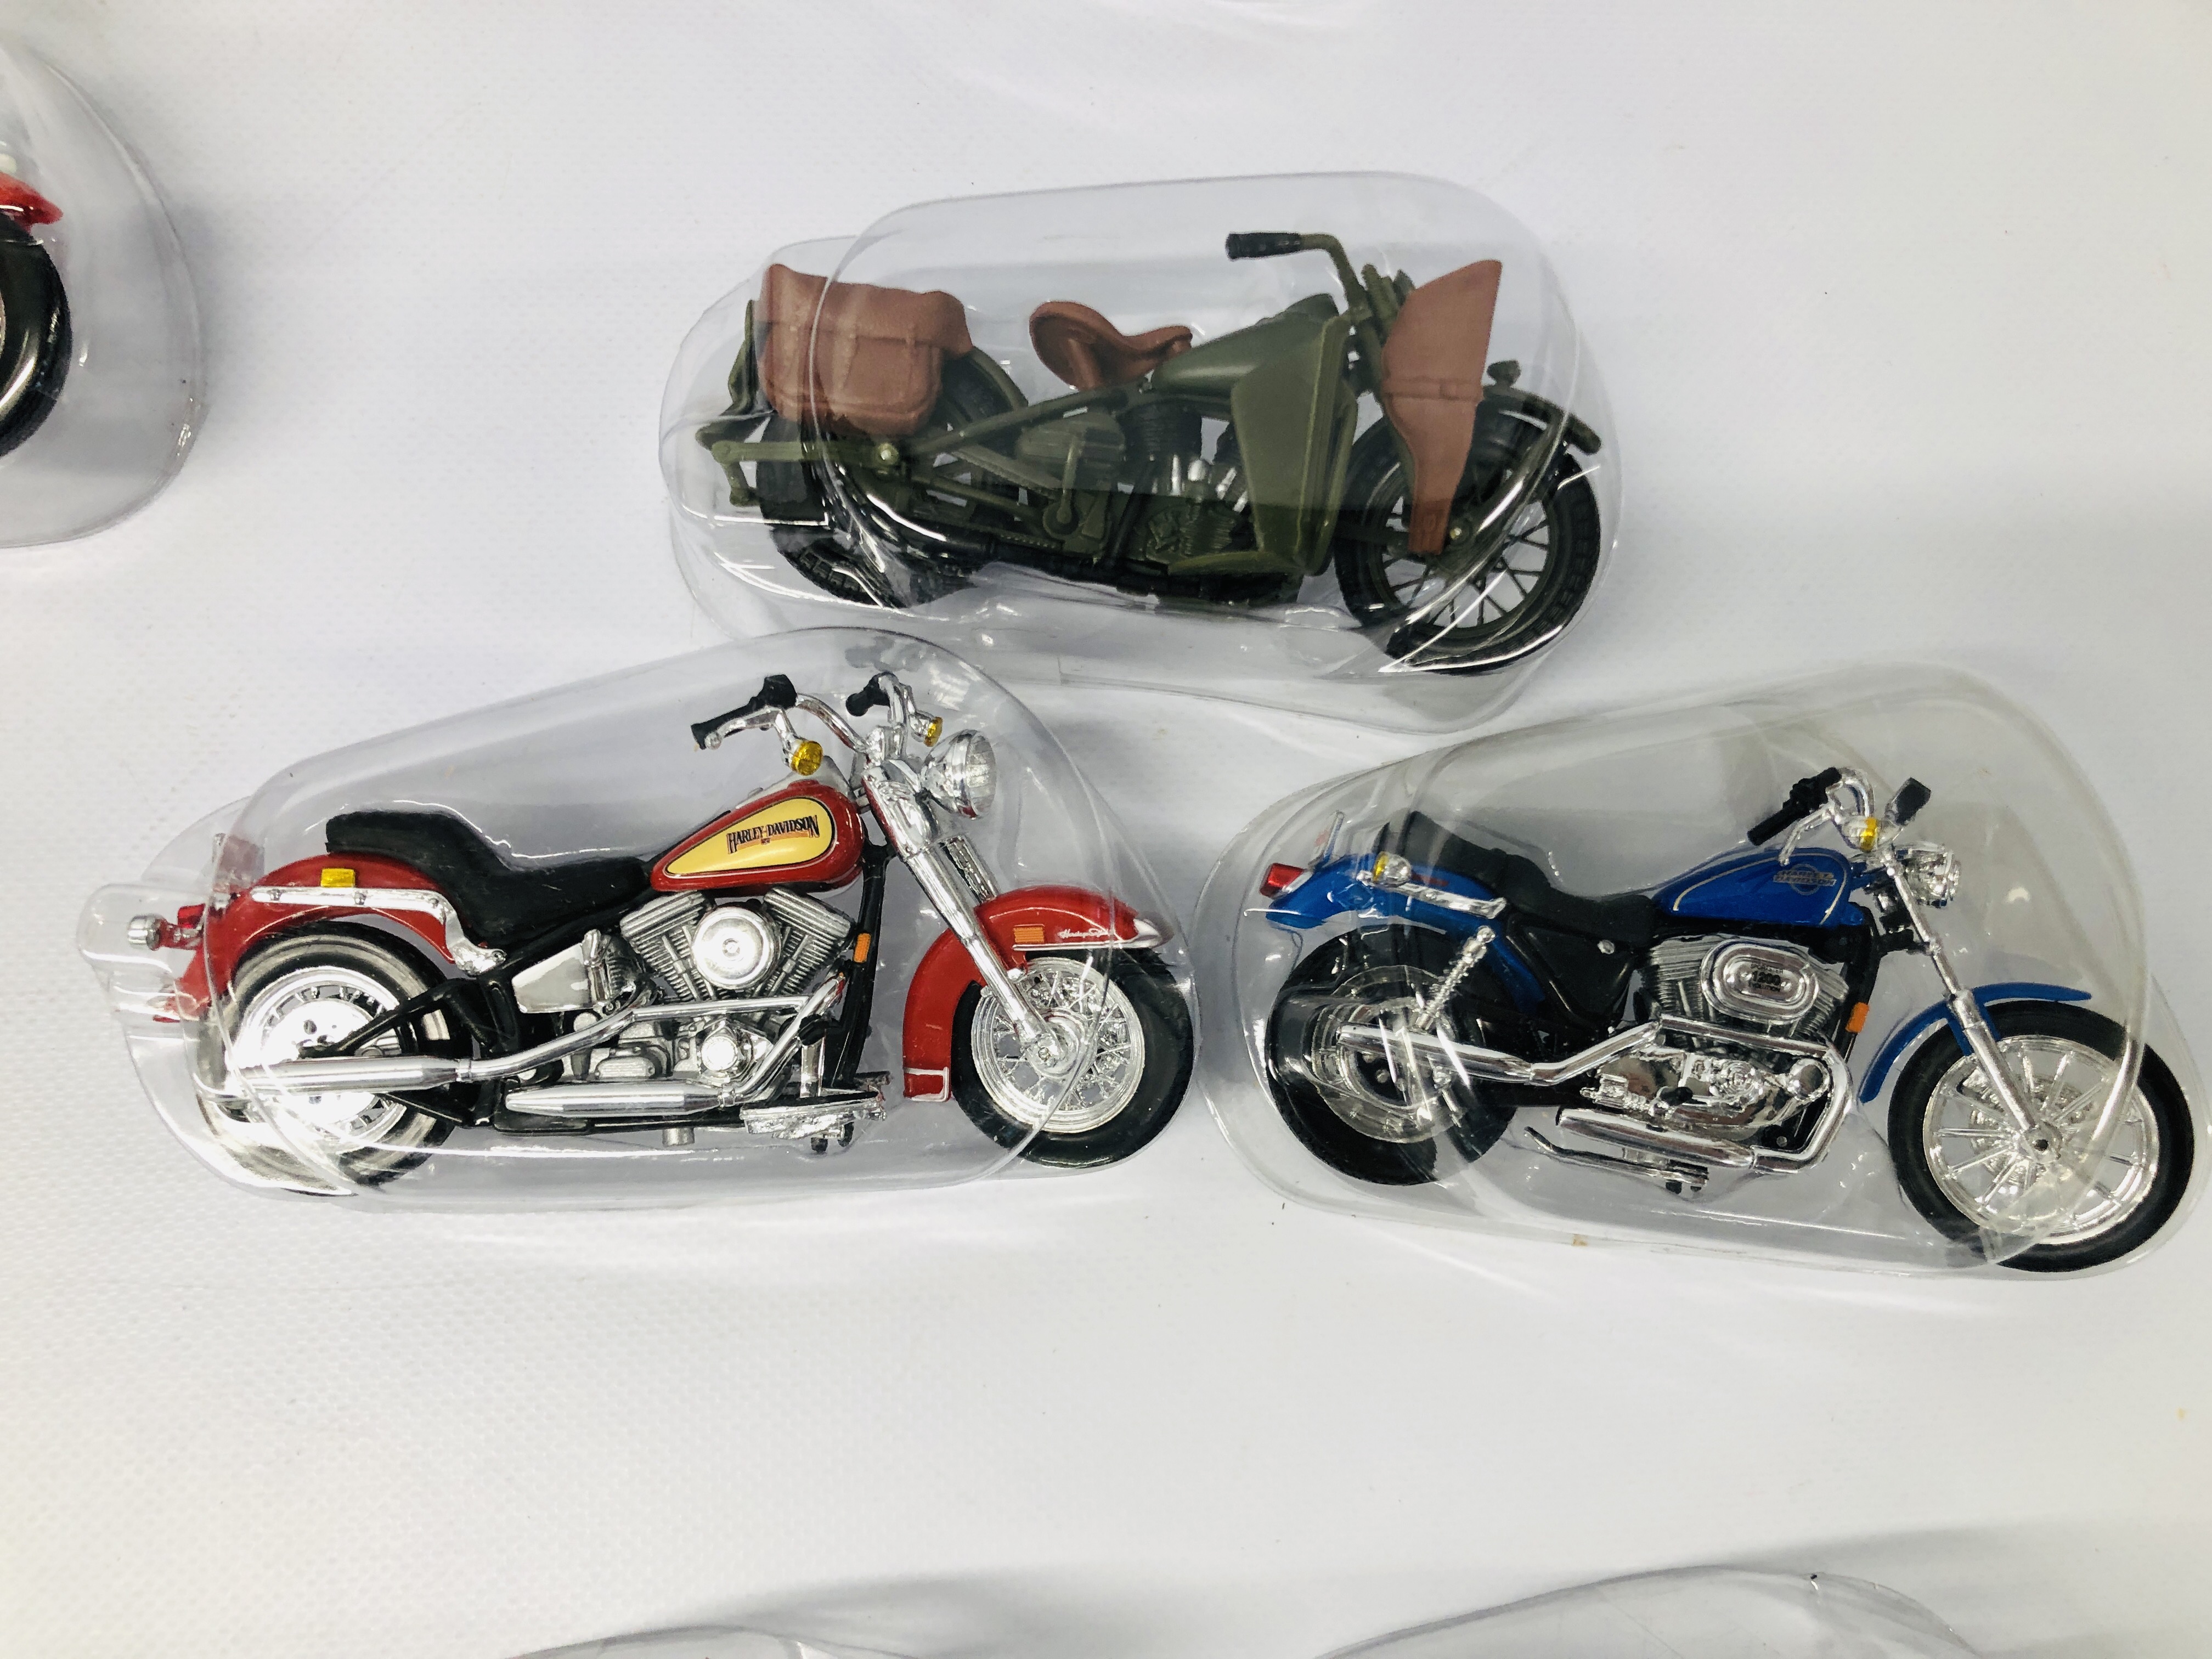 A COMPLETE SET OF 24 HARLEY DAVIDSON MODEL MOTORCYCLES "THE LEGENDS COLLECTION" - Image 3 of 9